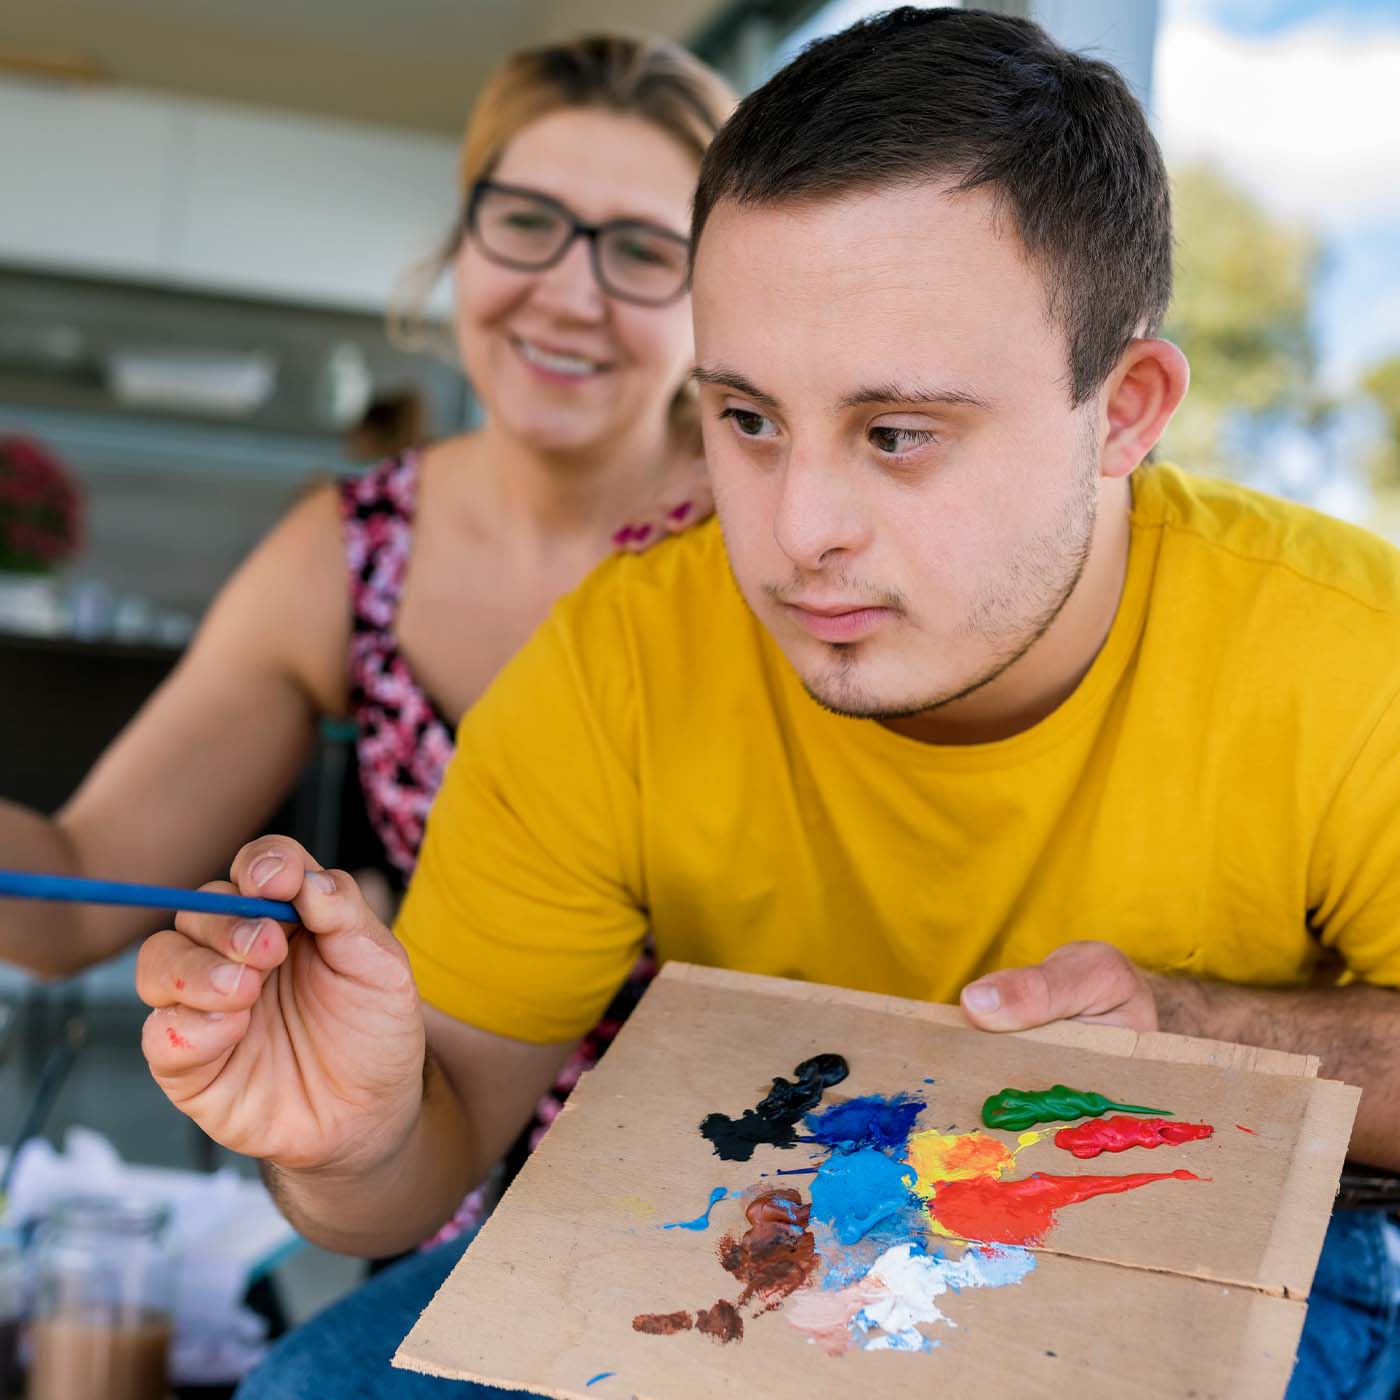 teenage boy with down syndrome painting